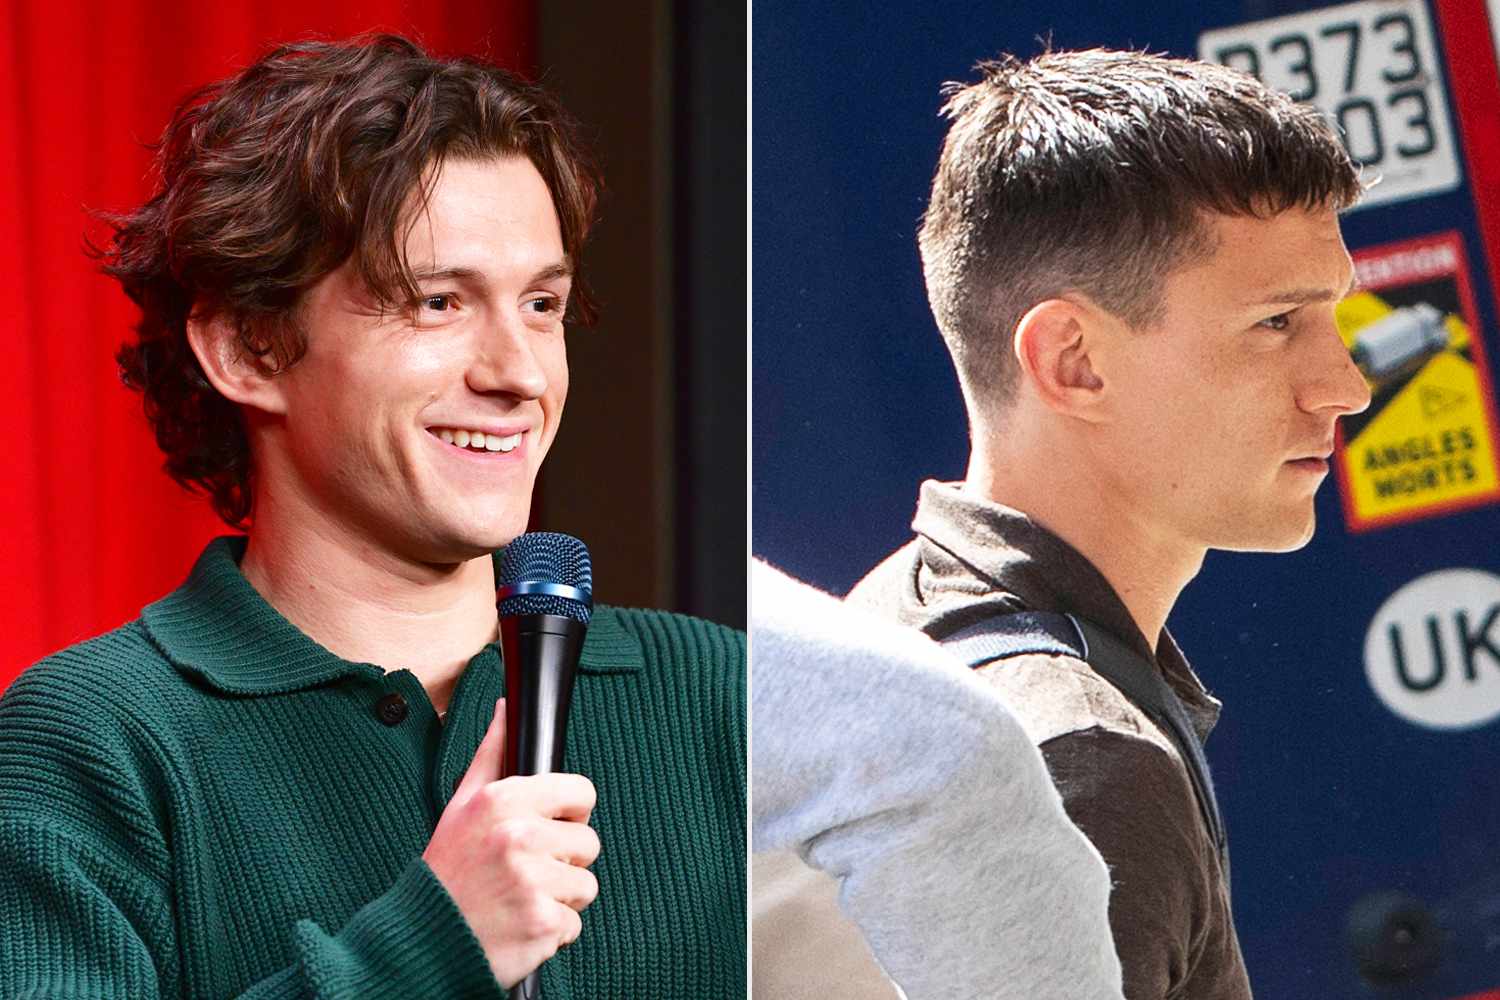 Tom Holland Ditches His Signature Curls for a New Shorter Hairstyle Ahead of 'Romeo & Juliet' Role in London